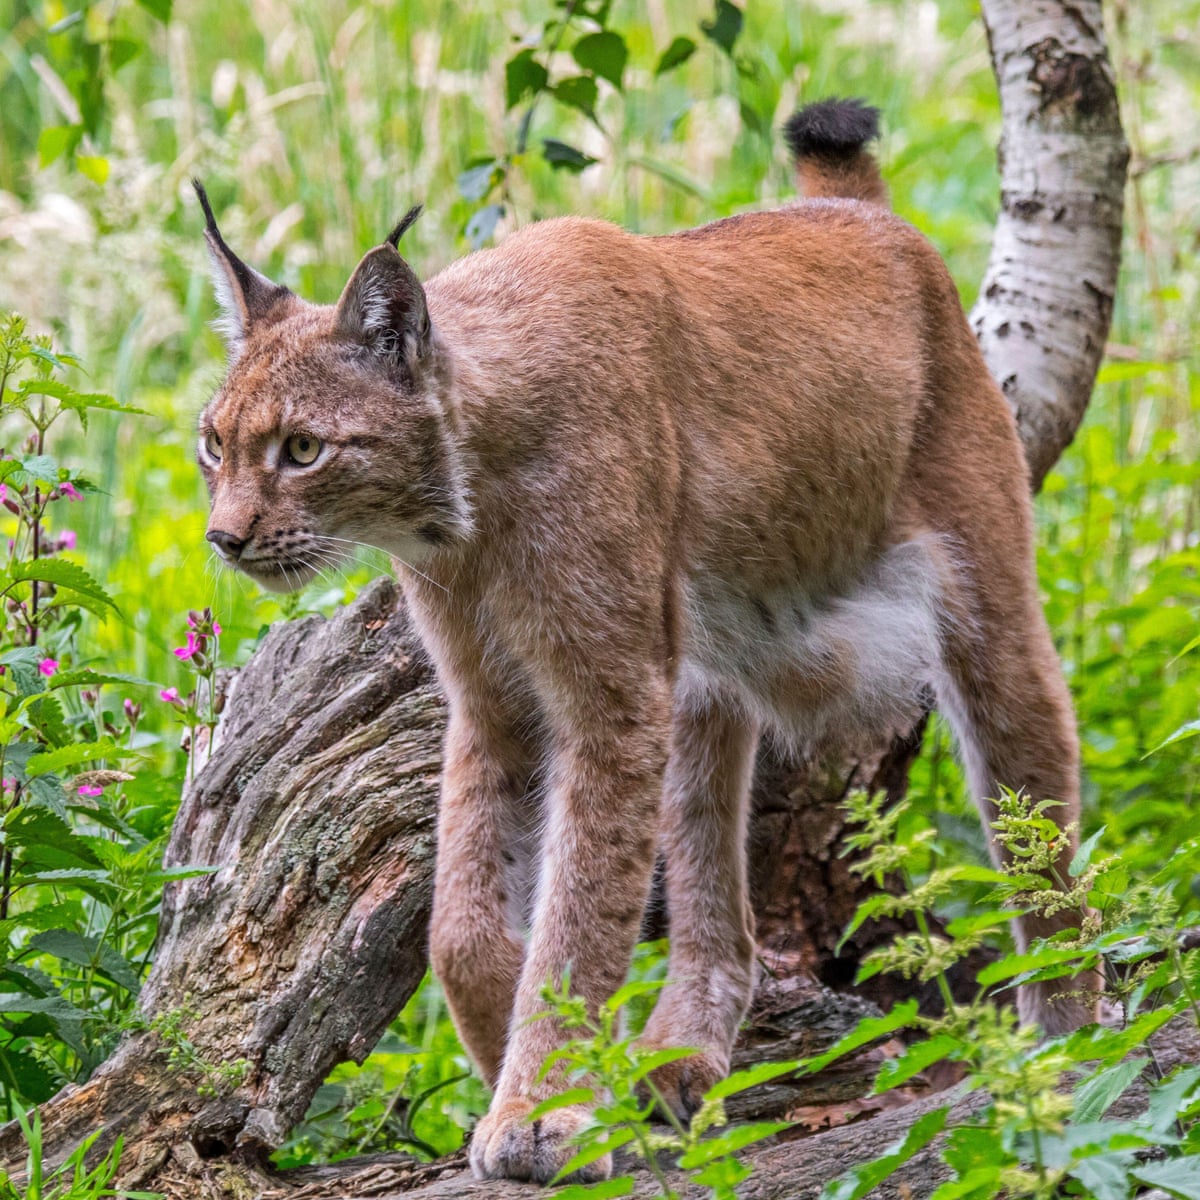 Lynx in France face extinction with population down to 150 adults at most |  Wildlife | The Guardian